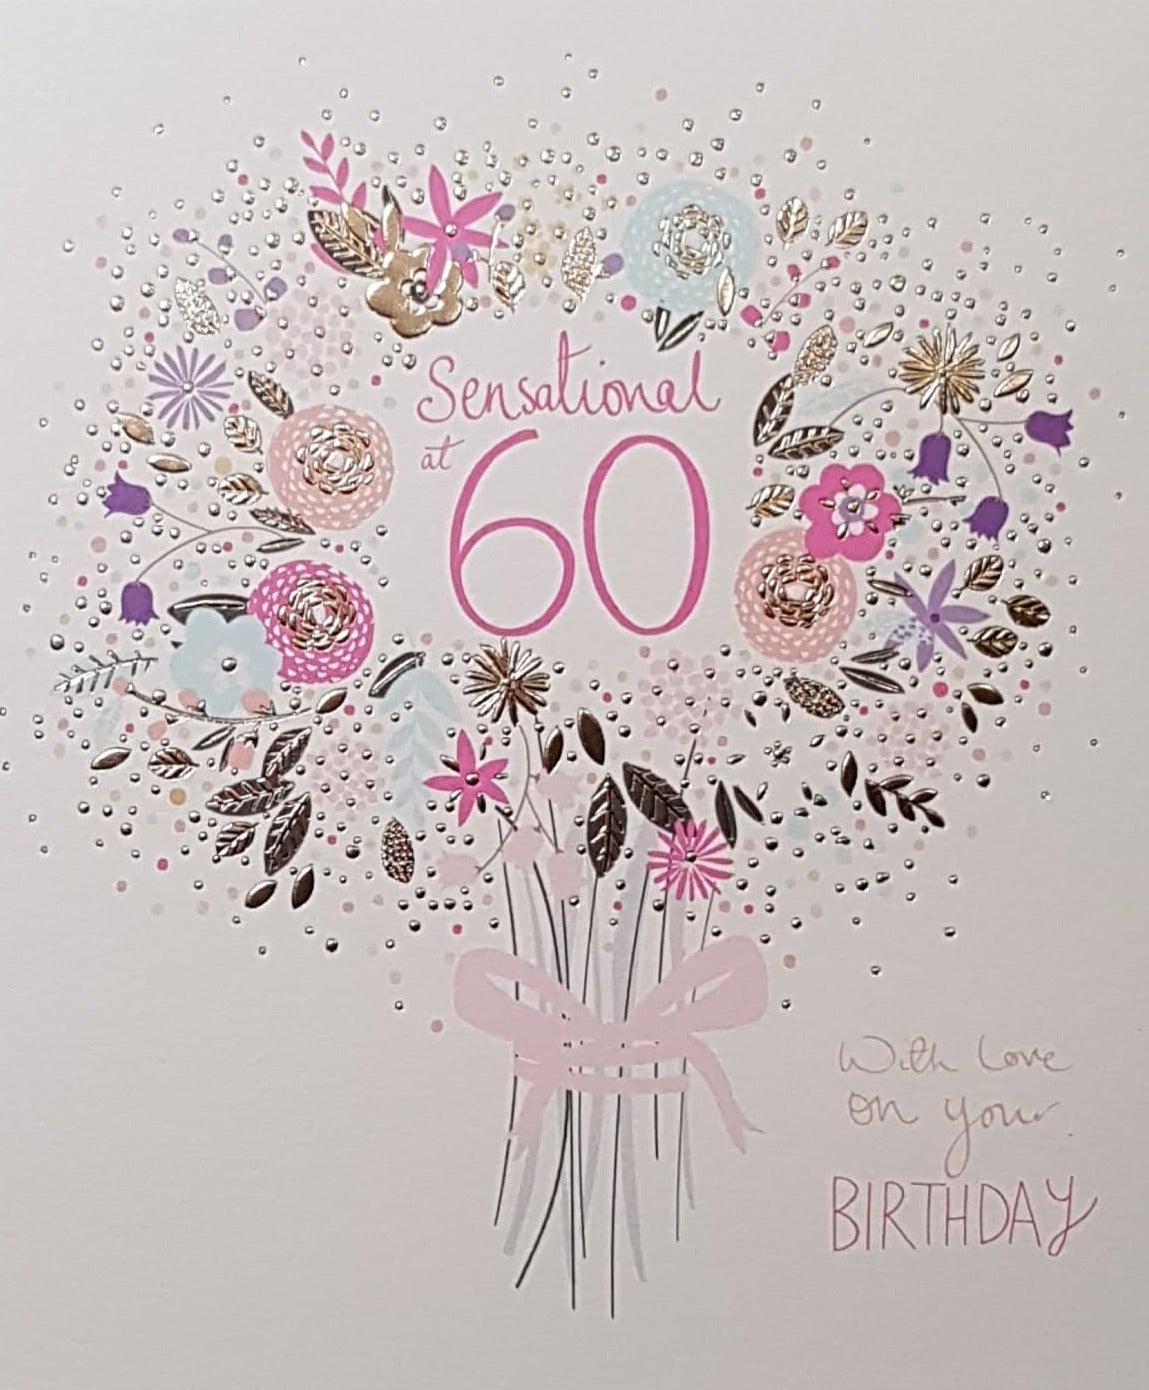 Age 60 Birthday Card - A Pink Font Inside A Circle Of Flowers In A Bou ...